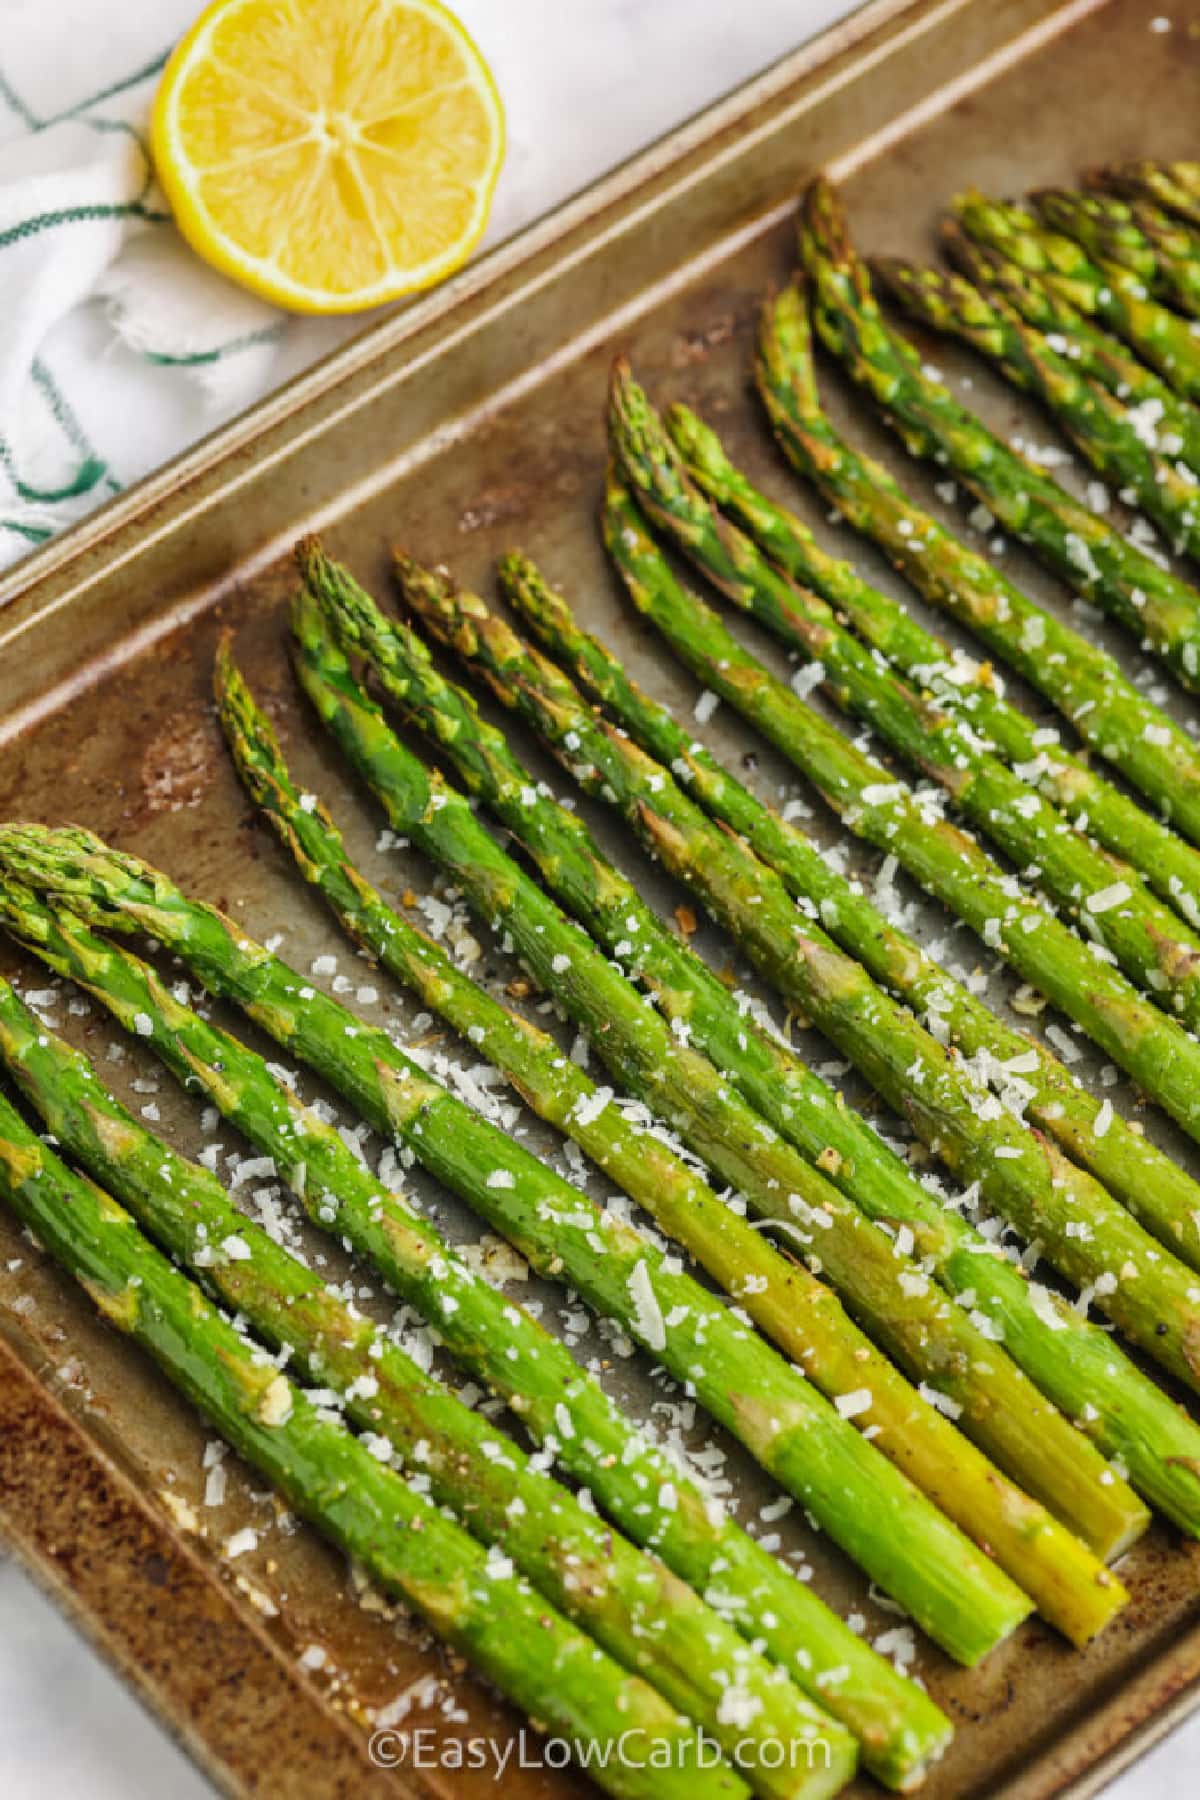 oven-roasted asparagus with lemon, in a single layer on a baking sheet, with a sprinkle of parmesan cheese on top